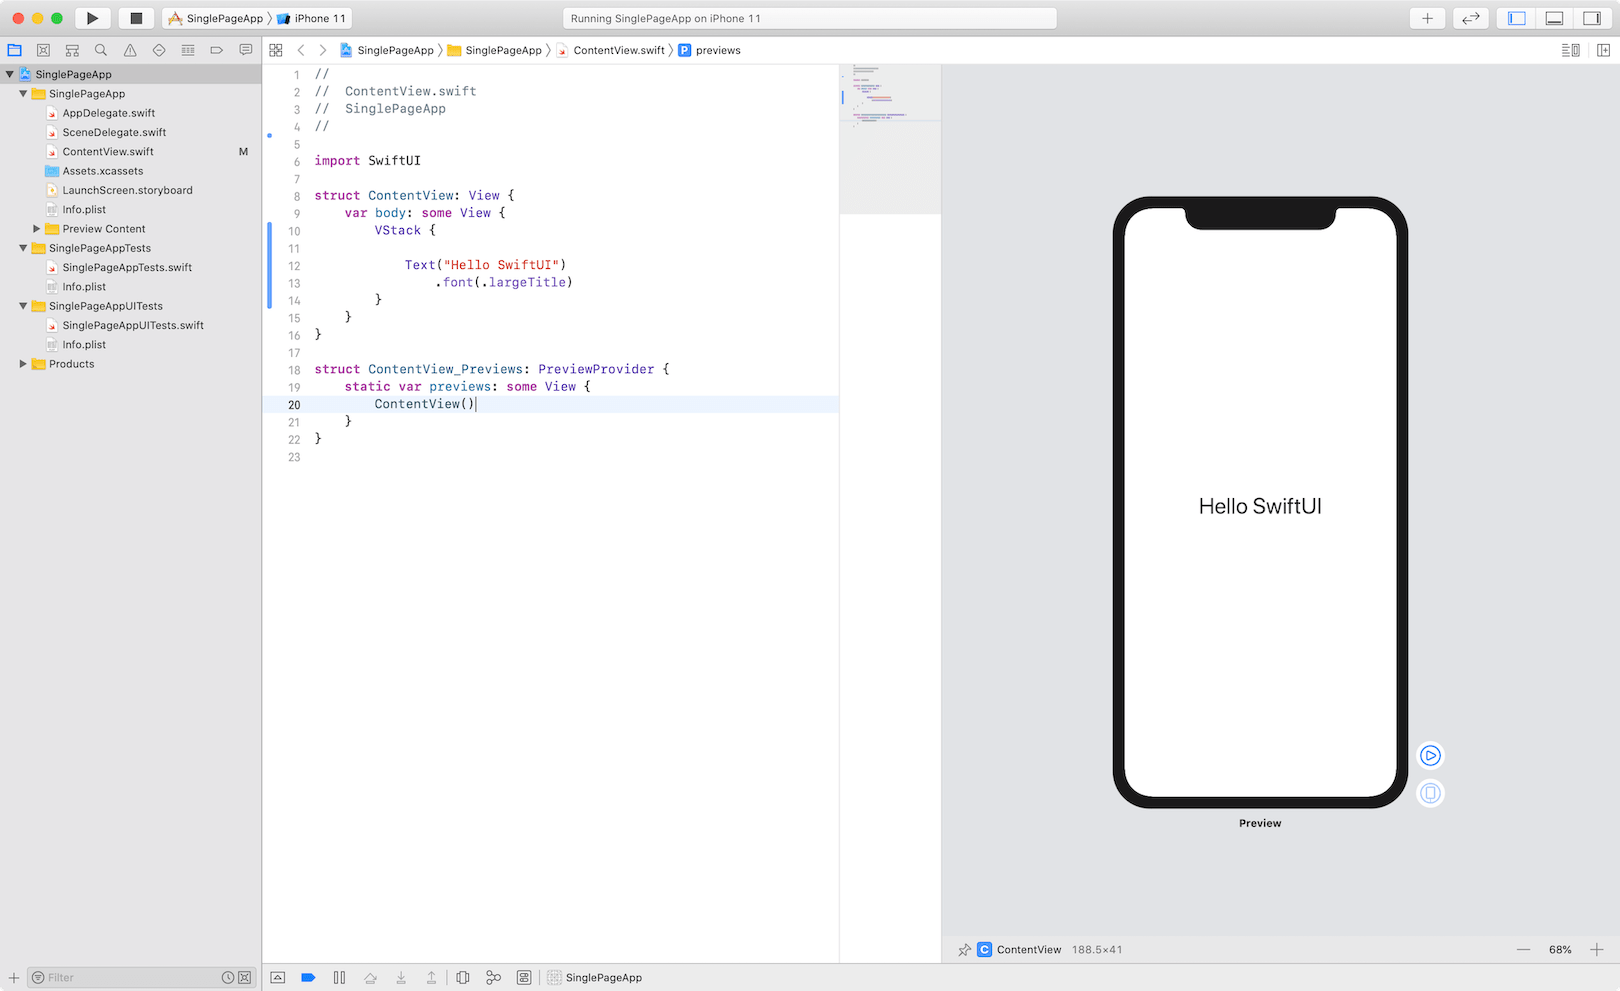 Image of using SwiftUI on Xcode